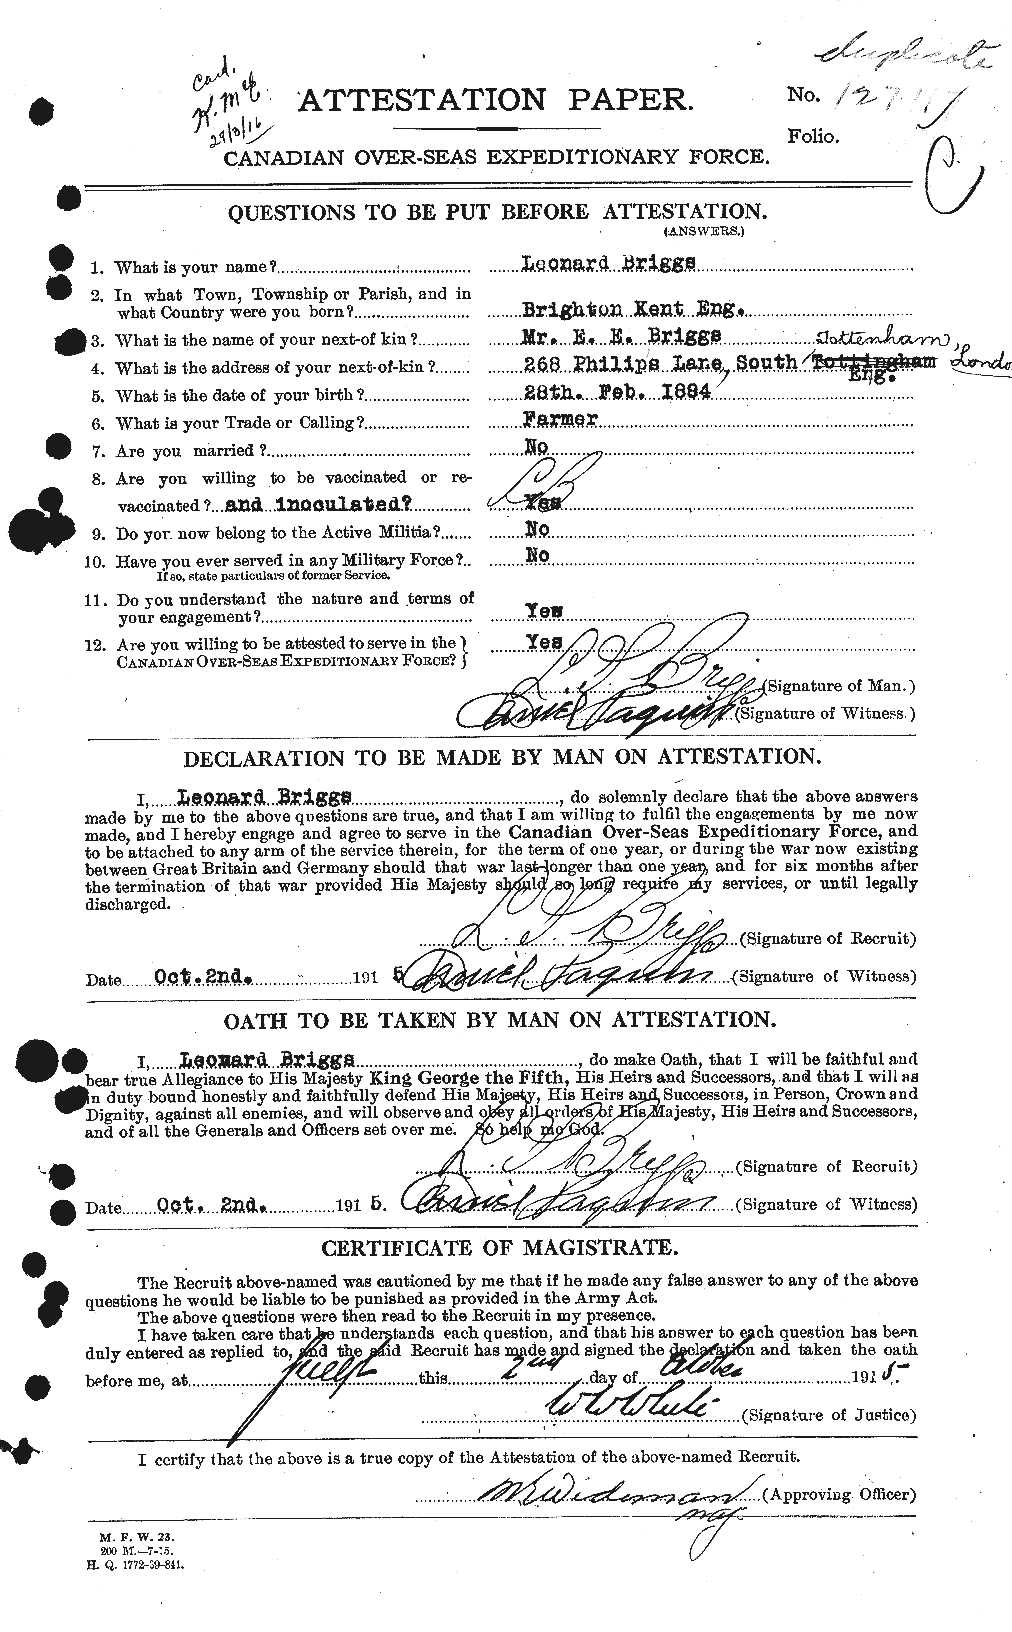 Personnel Records of the First World War - CEF 264072a